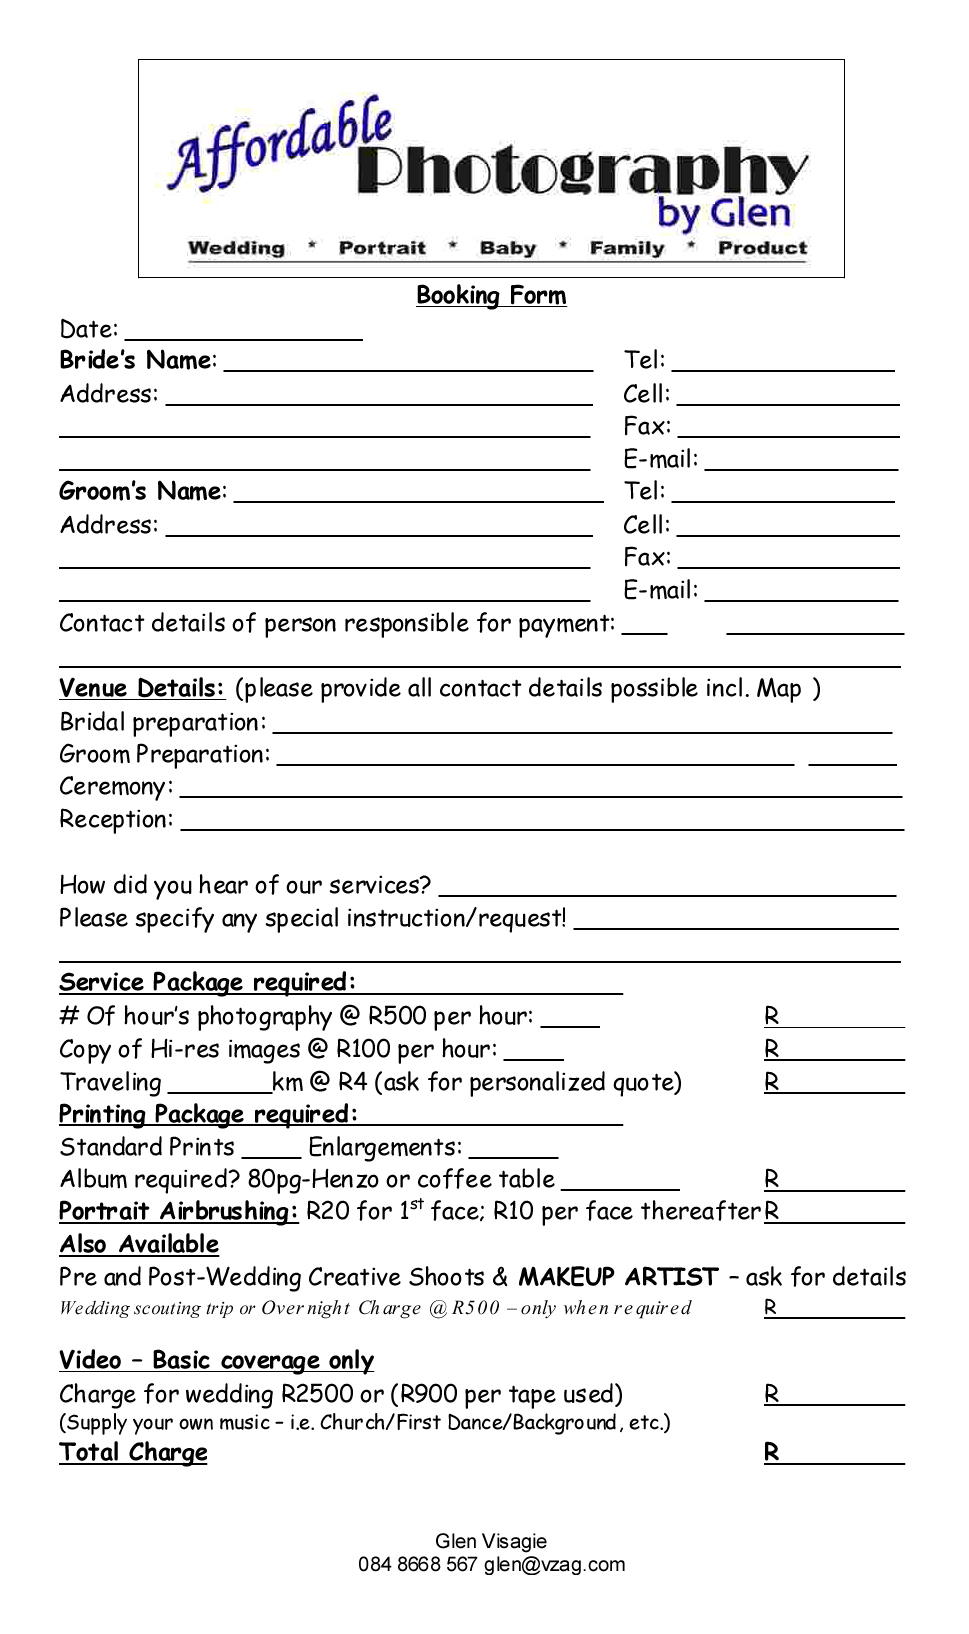  Booking Form Page 1 